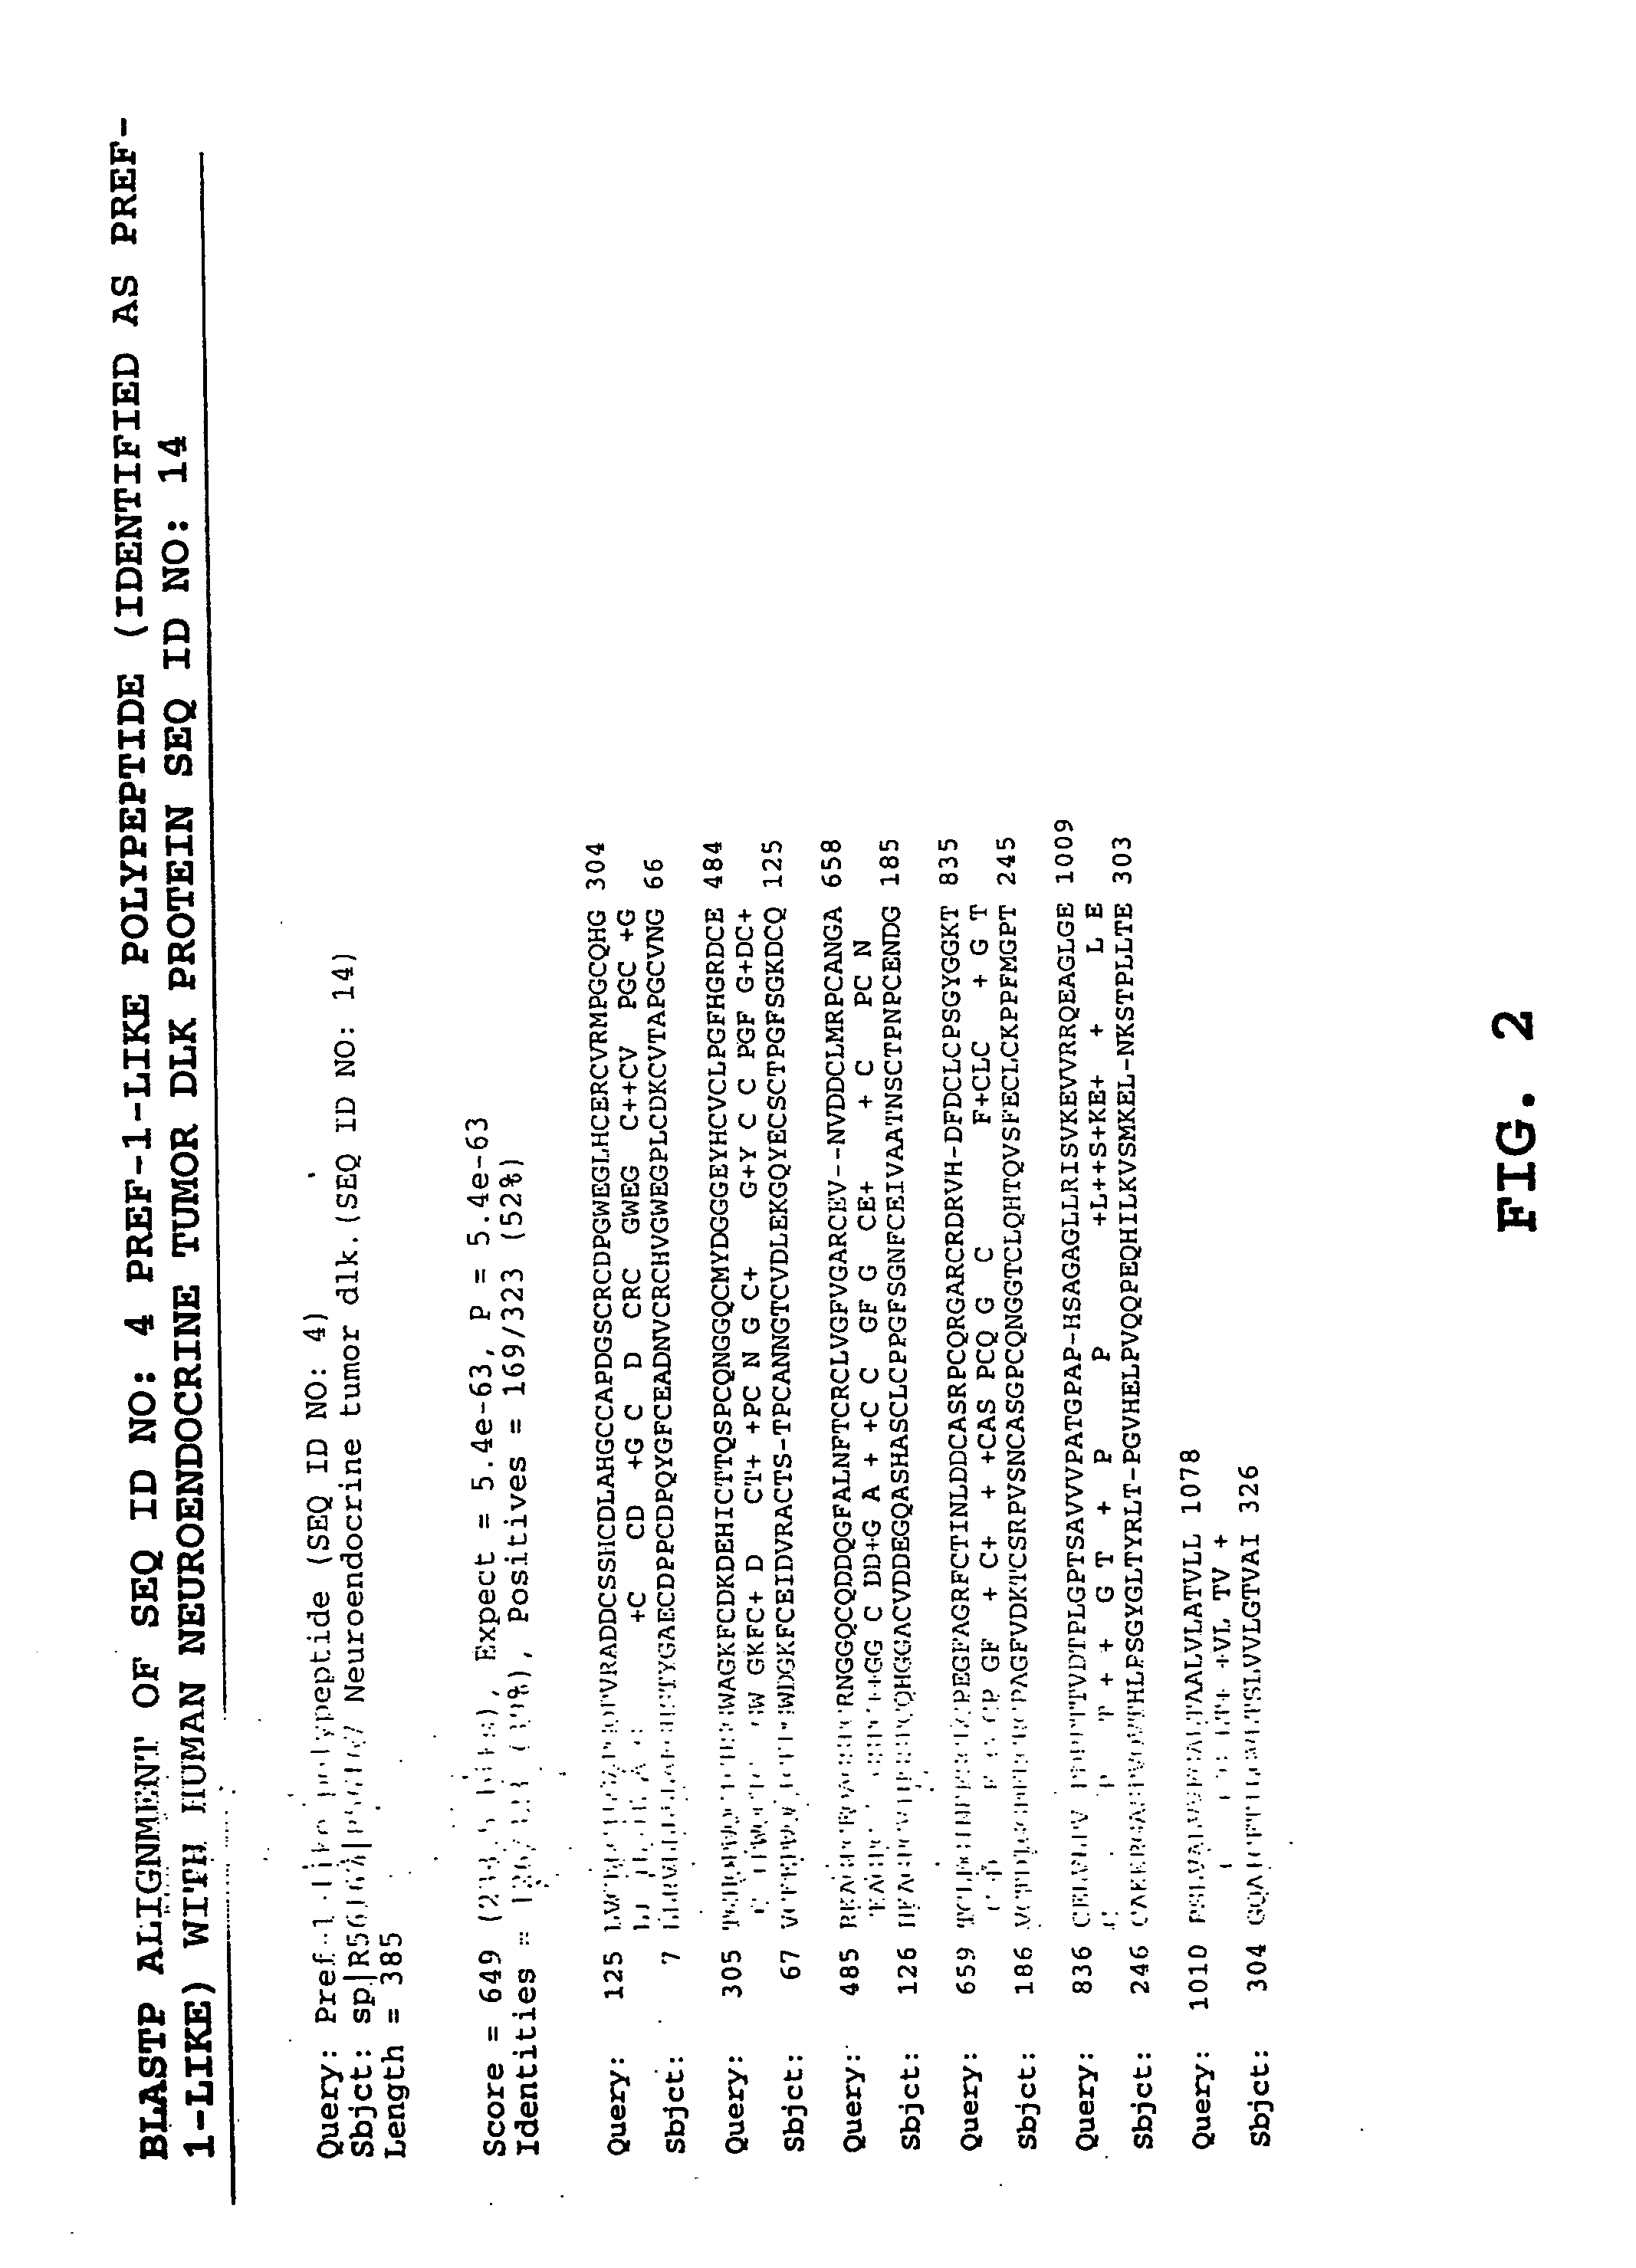 Methods and materials relating to preadipocyte factor-1-like (pref-1-like) polypeptides and polynucleotides